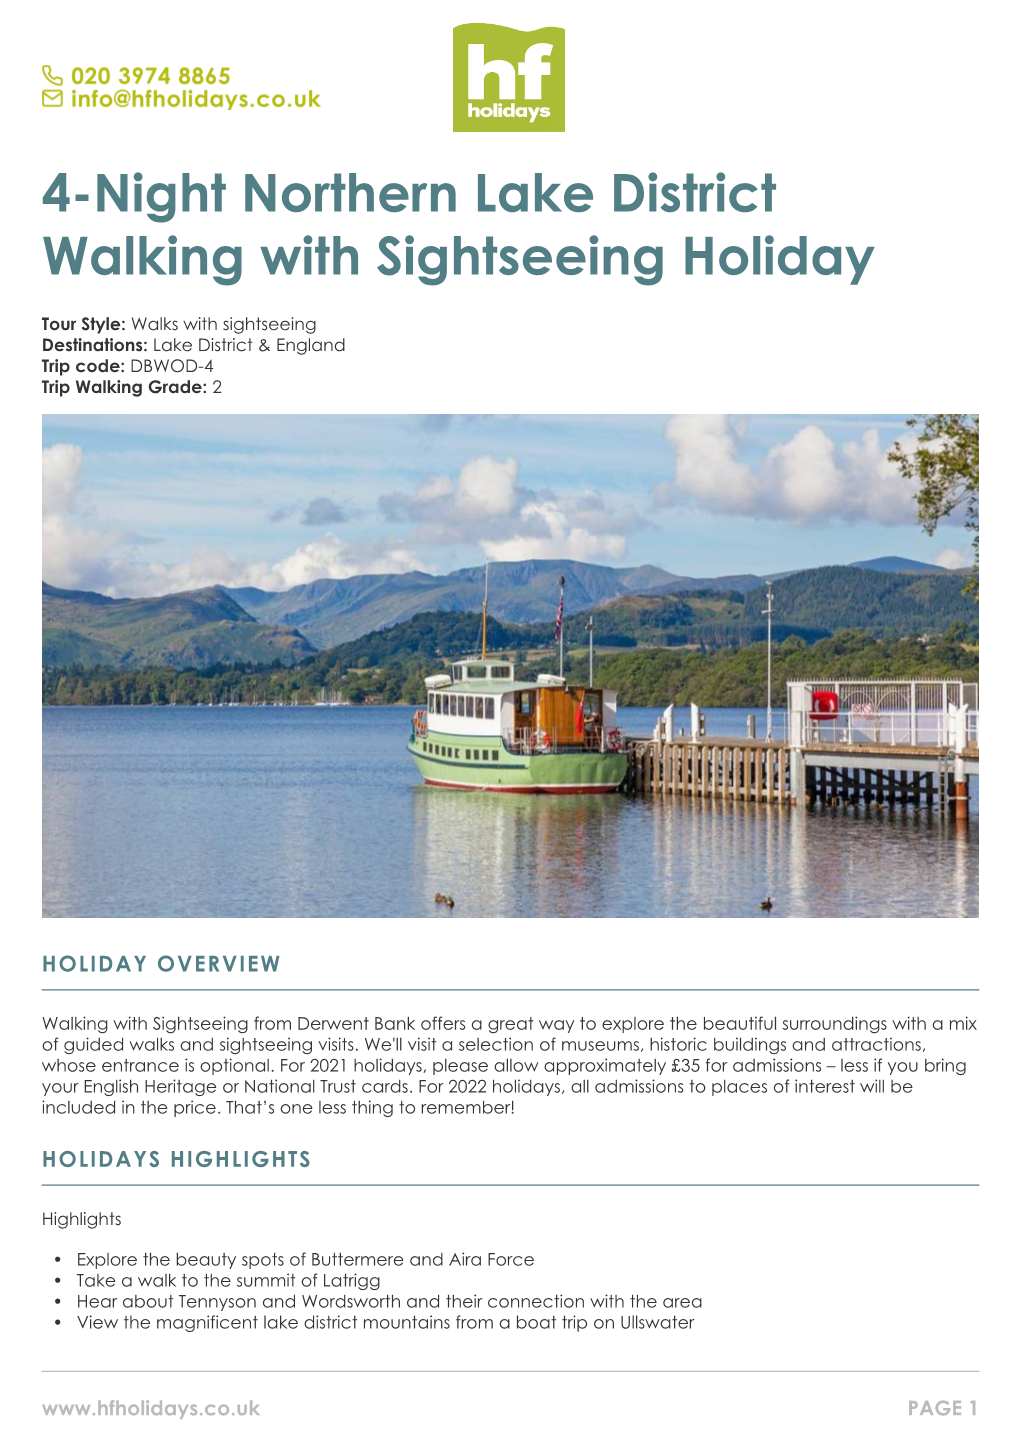 4-Night Northern Lake District Walking with Sightseeing Holiday